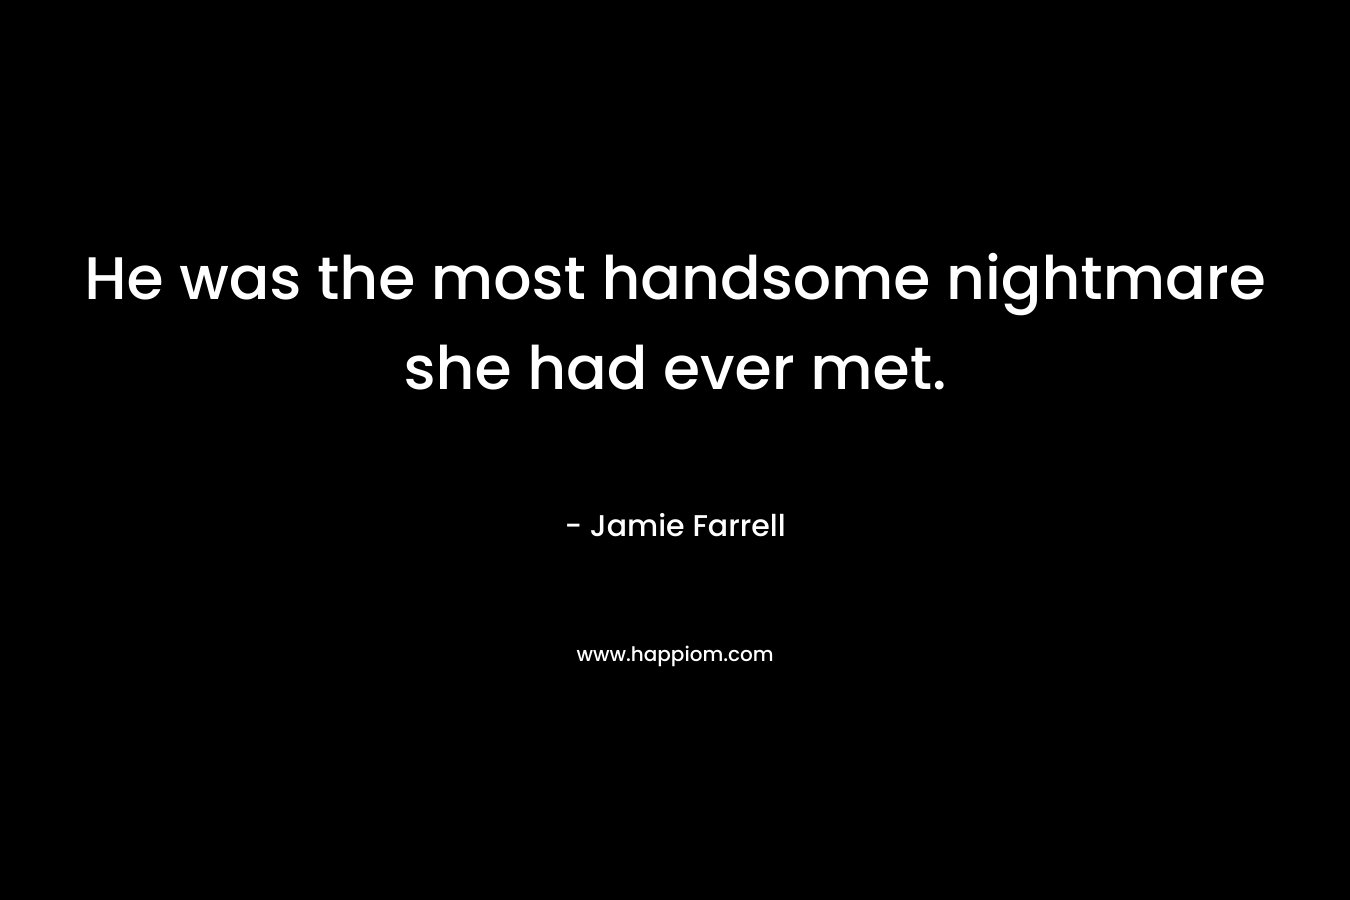 He was the most handsome nightmare she had ever met.